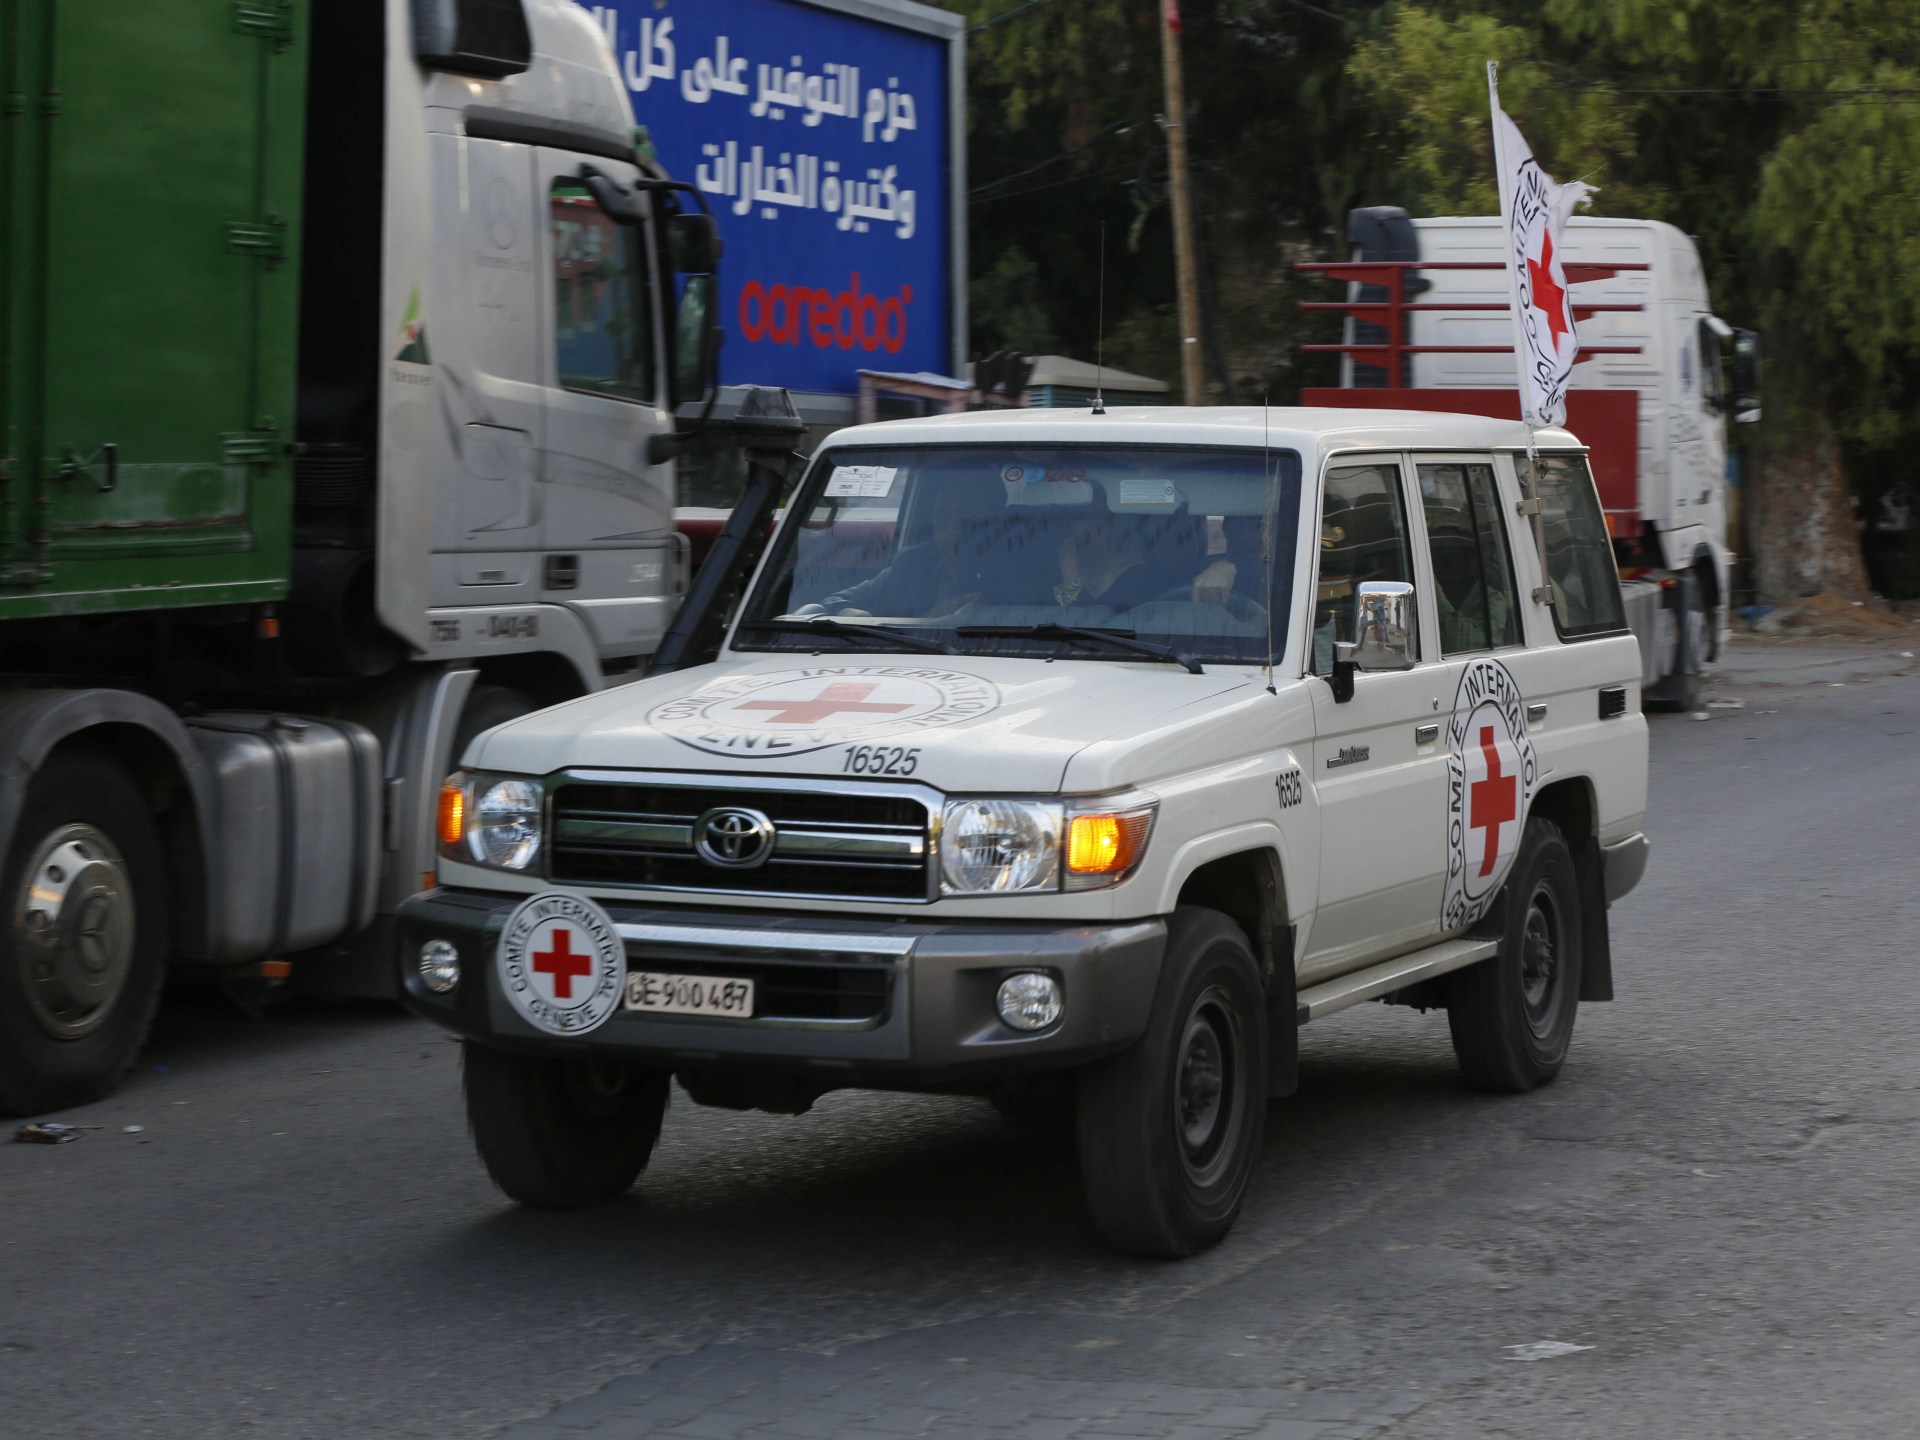 Red Cross ‘deeply troubled’ as aid convoy attacked in Gaza City